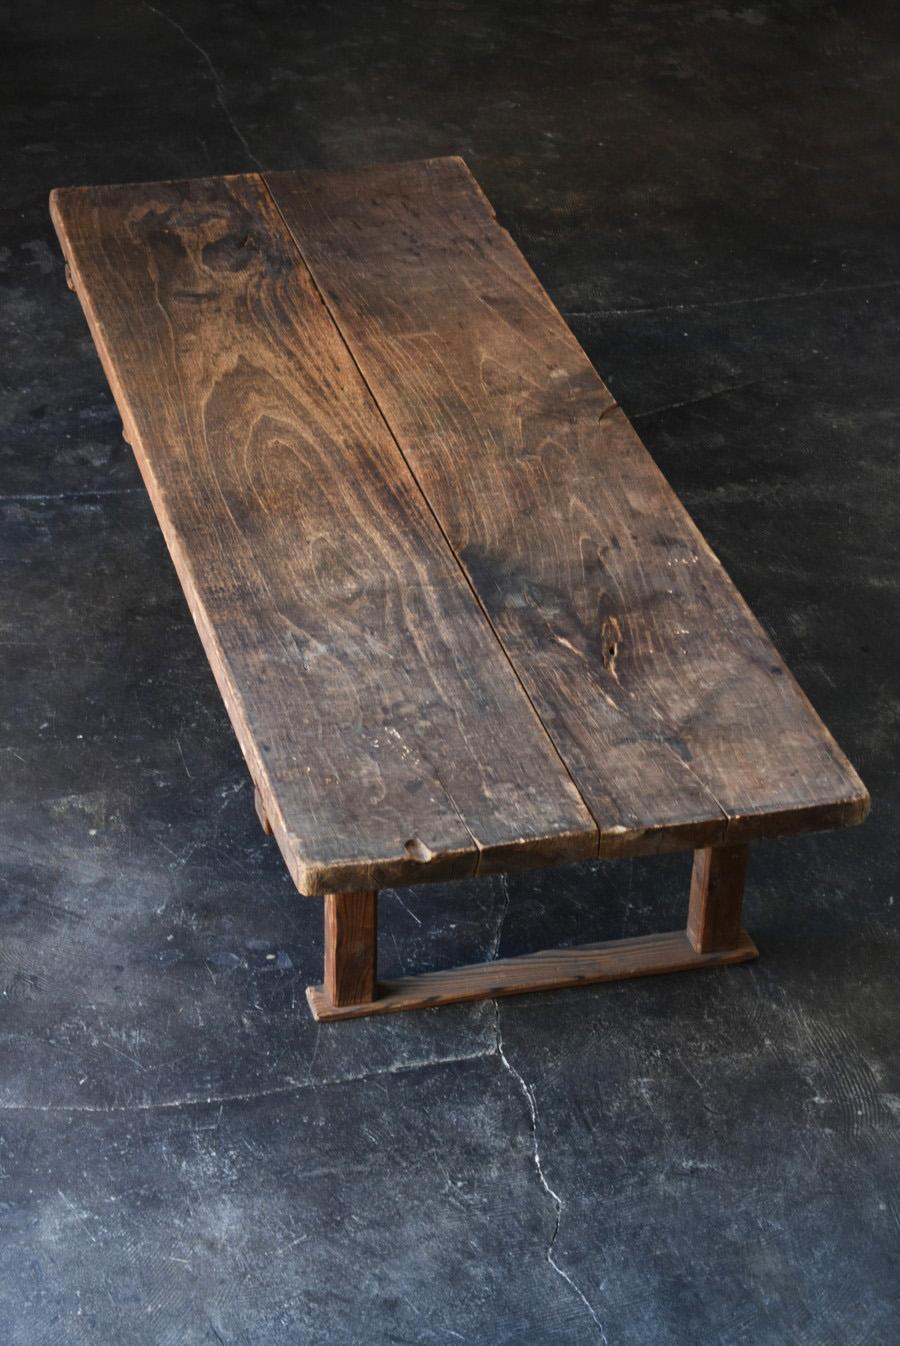 This is a large low table made in Japan from the Taisho era to the early Showa era (1912-1940).
Originally, it is thought that it was a work table for sitting and doing some work.
There are countless small scratches on the surface of the top